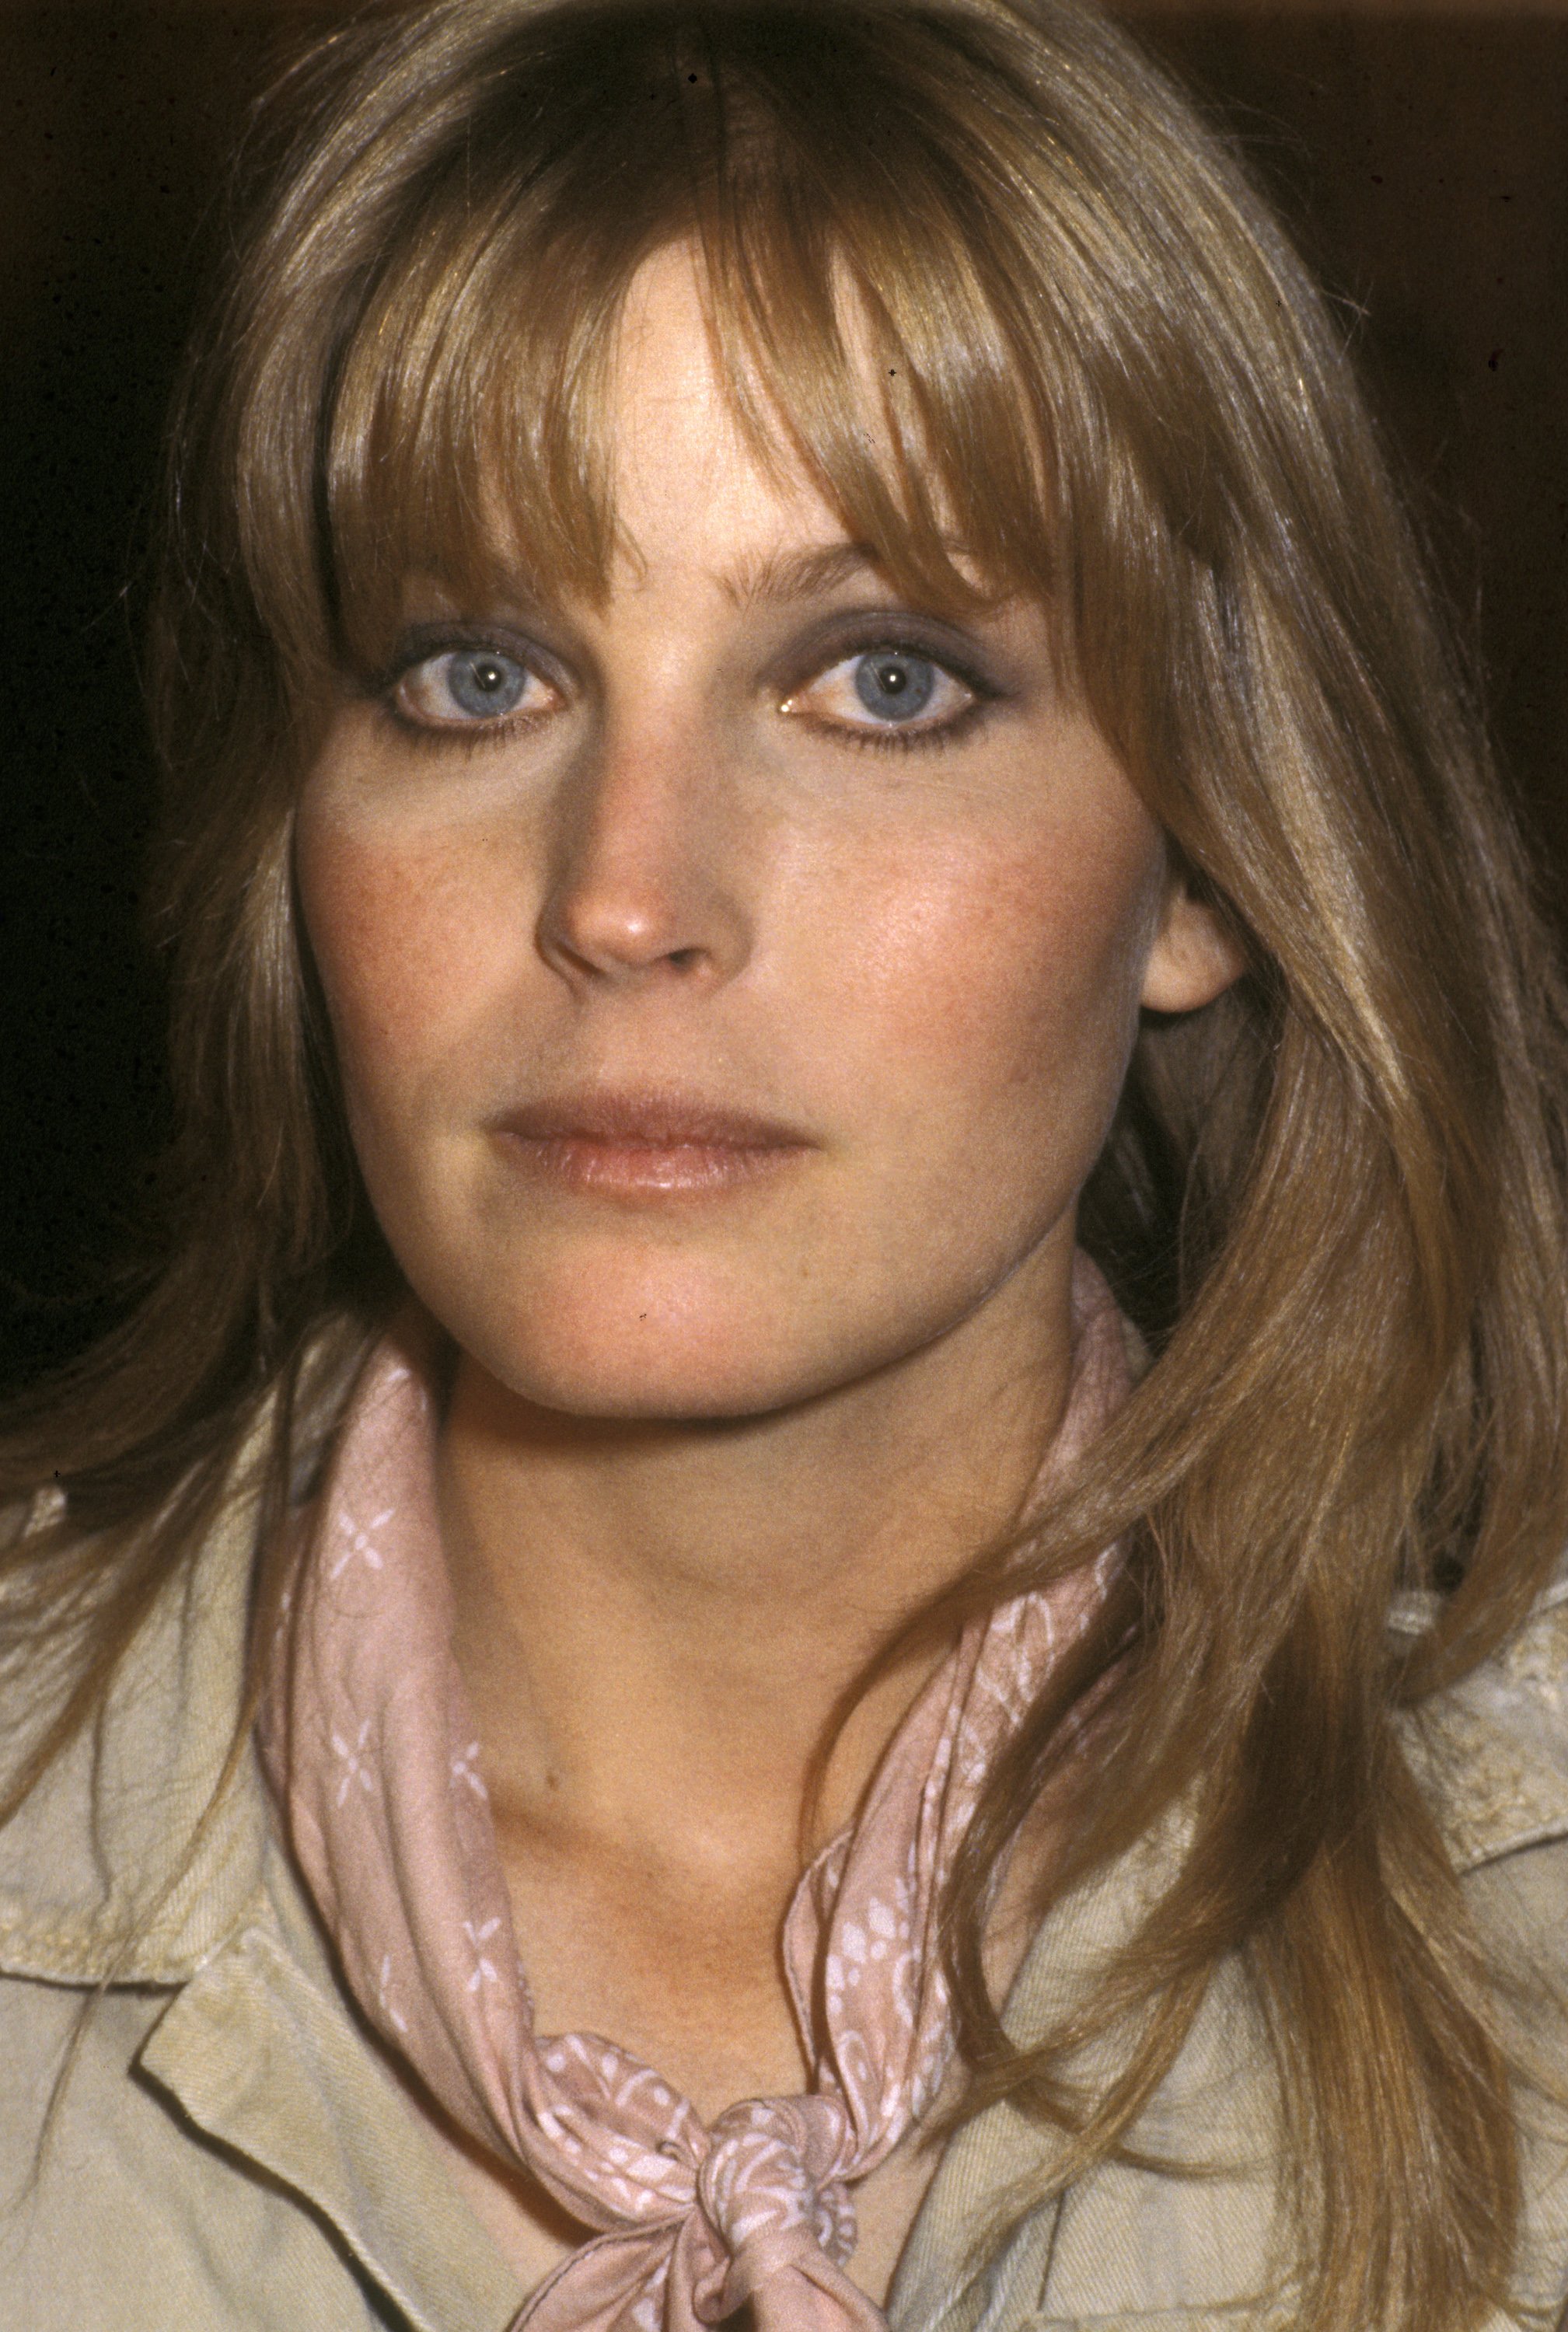 Model Bo Derek attends a press conference for "A Change of Season" on February 7, 1980 | Photo: Getty Images